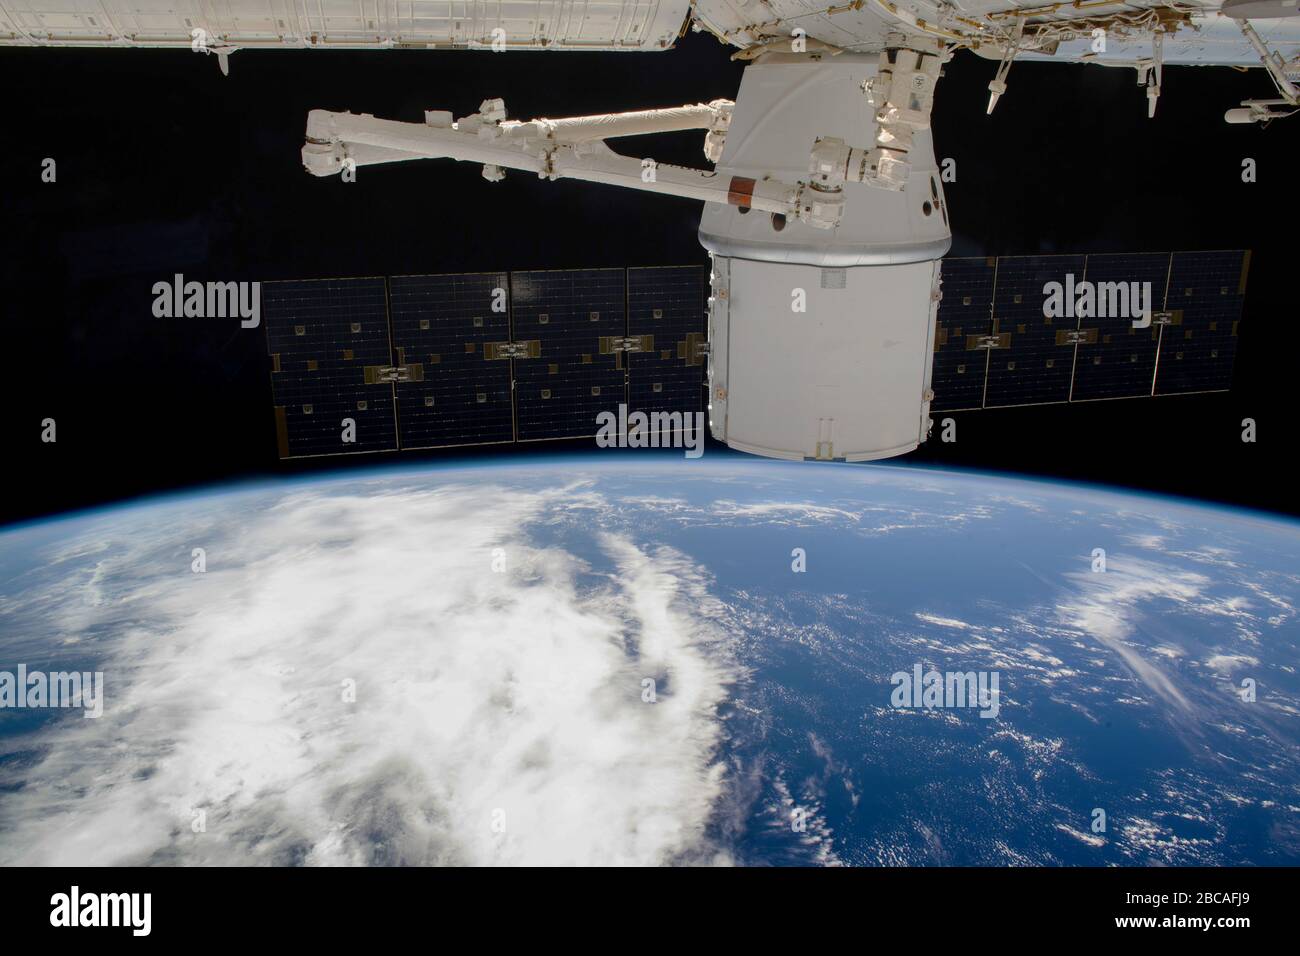 ISS - 09 Mar 2020 - The SpaceX Dragon resupply ship is pictured attached to the International Space Station's Harmony module as both spacecraft were s Stock Photo